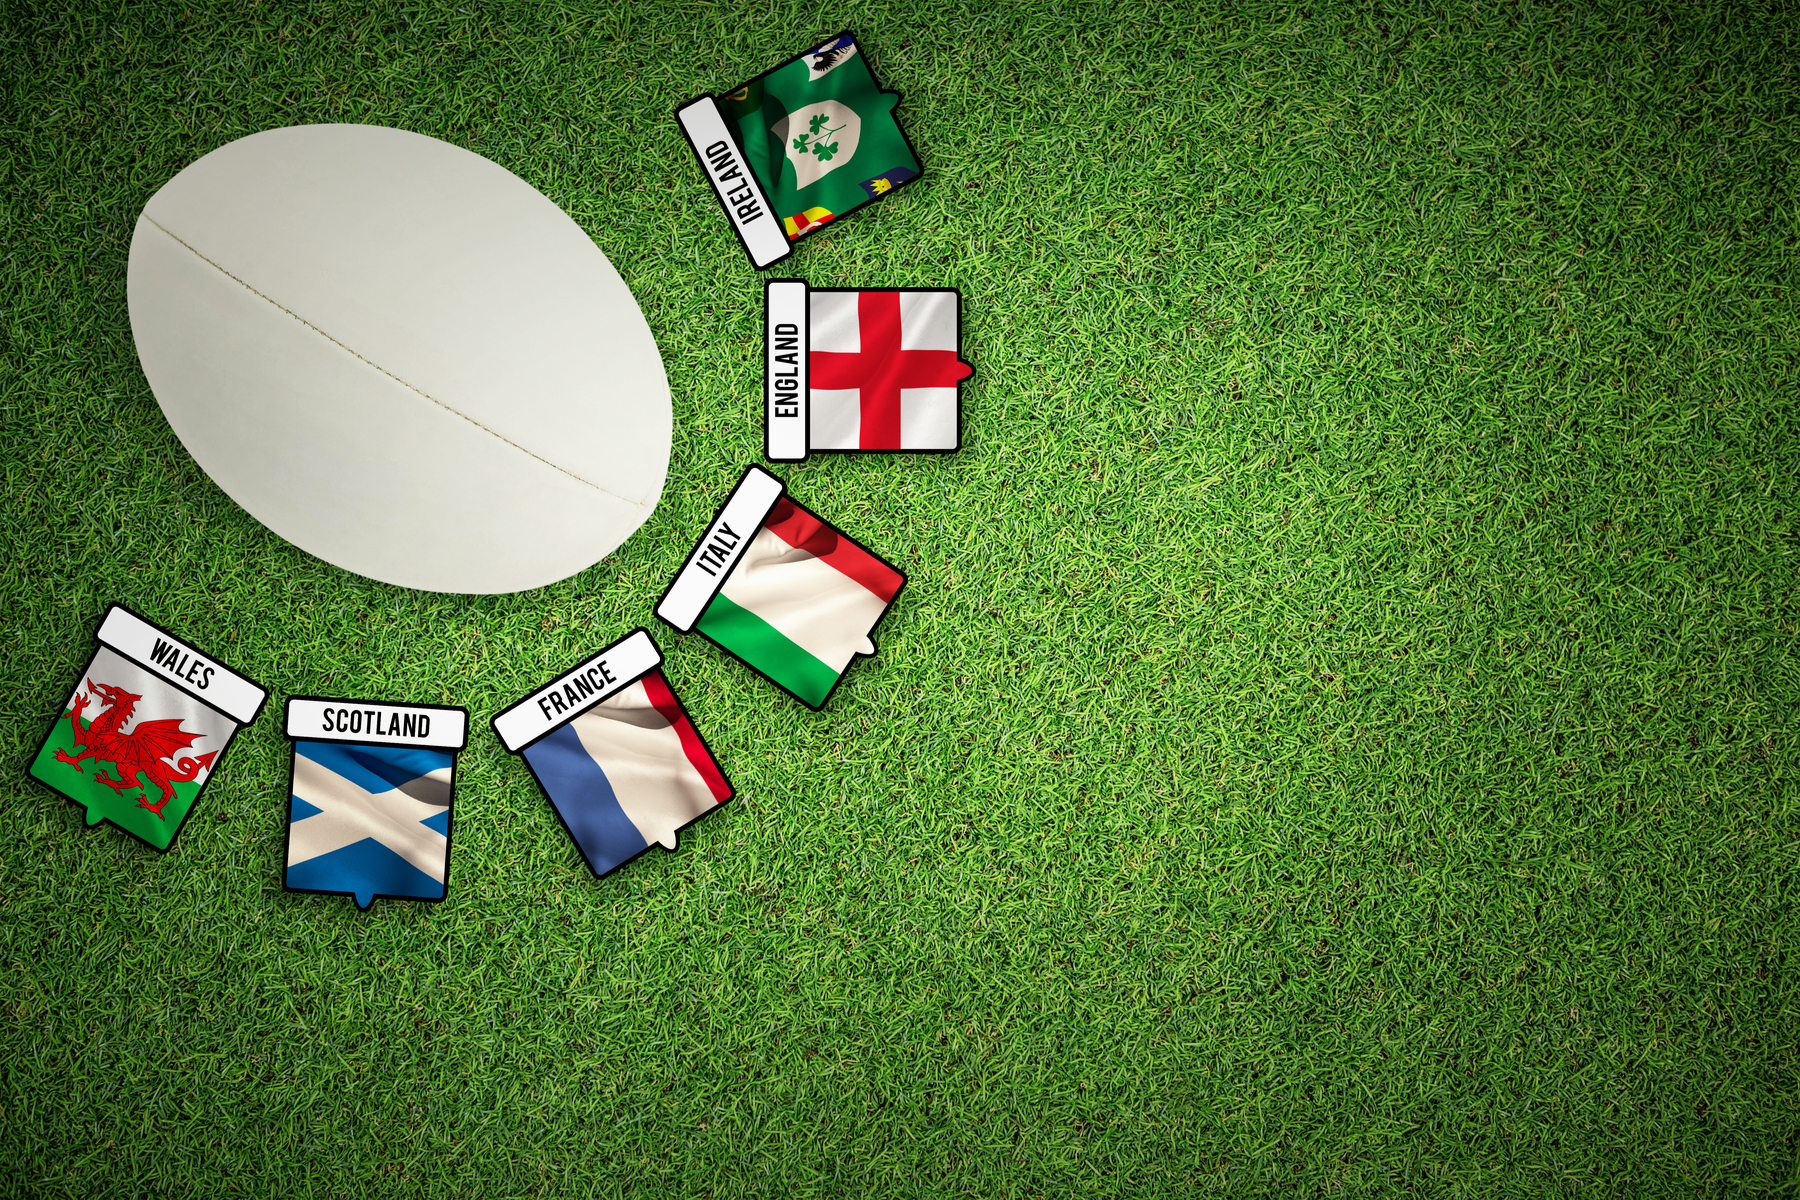 4 key financial lessons you can learn from the Six Nations